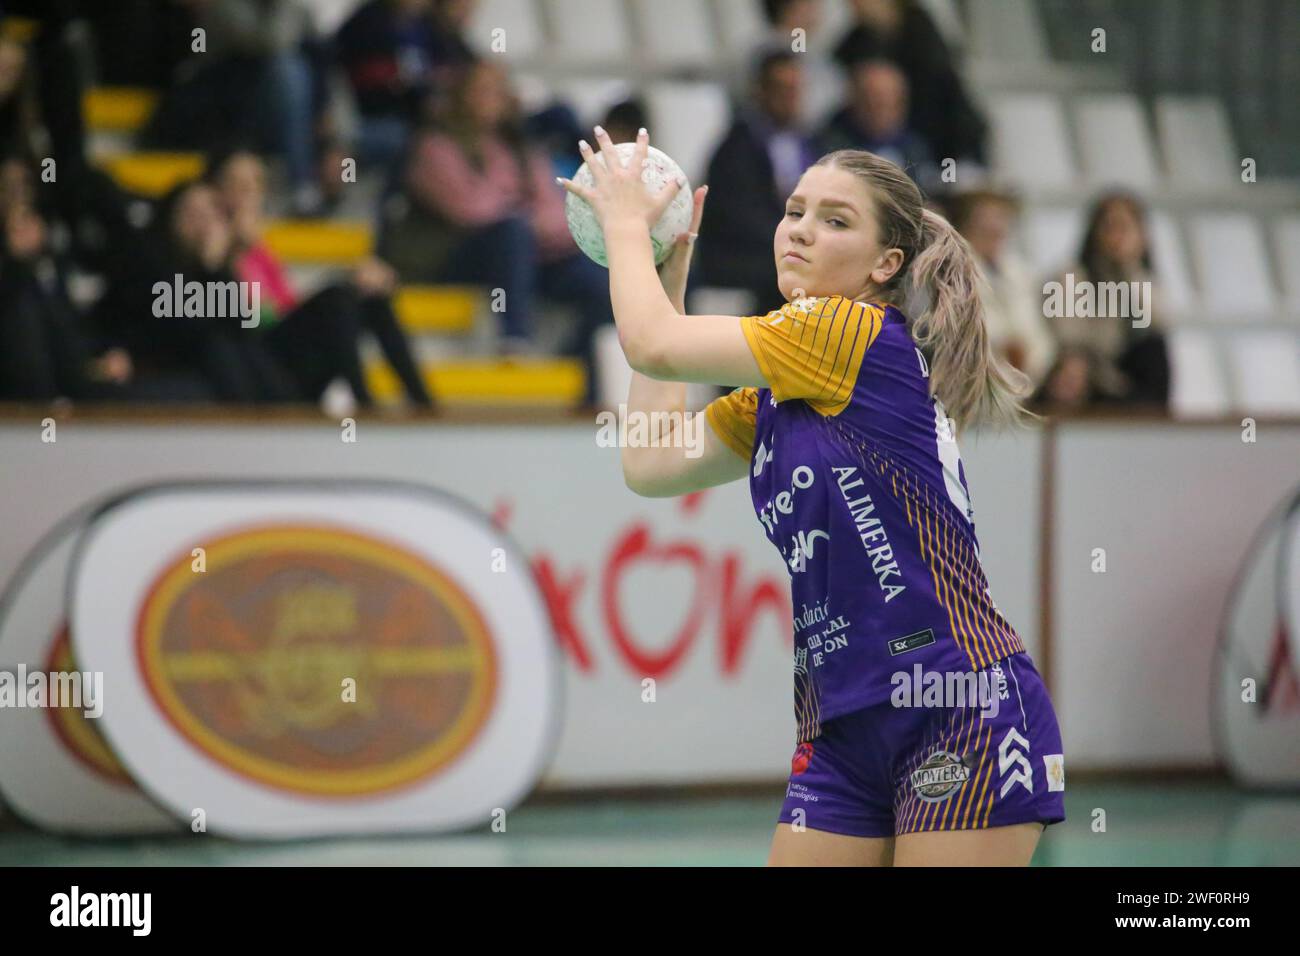 Gijón, Spain, 27th January, 2024: The player of Motive.co Gijón Balonmano La Calzada, Dorottya Margit Zentai (66) with the ball during the 15th Matchday of the Liga Guerreras Iberdrola 2023-24 between Motive.co Gijón Balonmano La Calzada and Conserbas Orbe Rubensa BM. Porriño, on January 27, 2024, at the Arena Pavilion, in Gijón, Spain. Credit: Alberto Brevers / Alamy Live News. Stock Photo